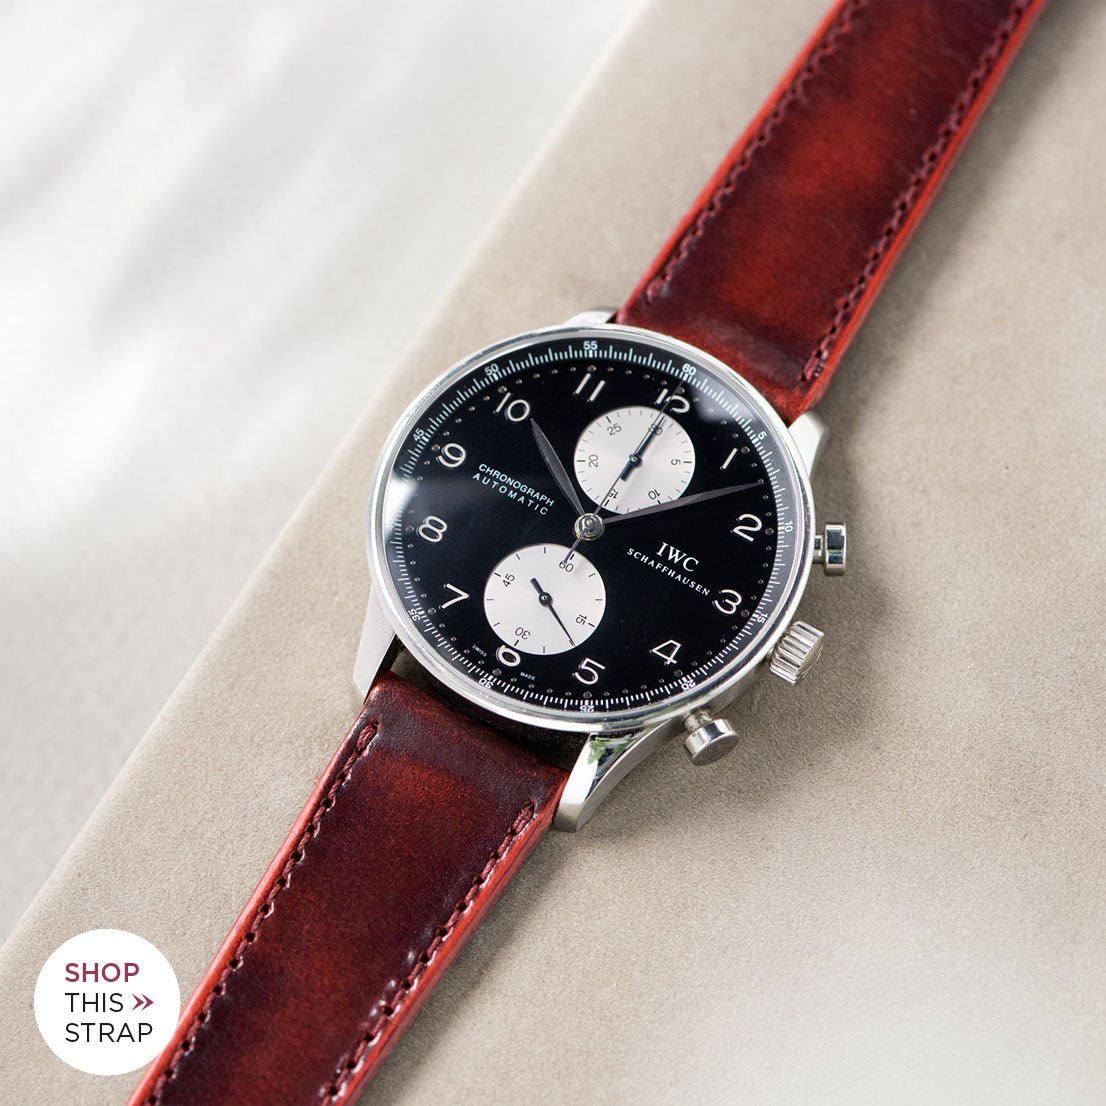 Bulang and Sons_Strap Guide_IWC-Portugieser_Degrade Chilli Red Leather Watch Strap